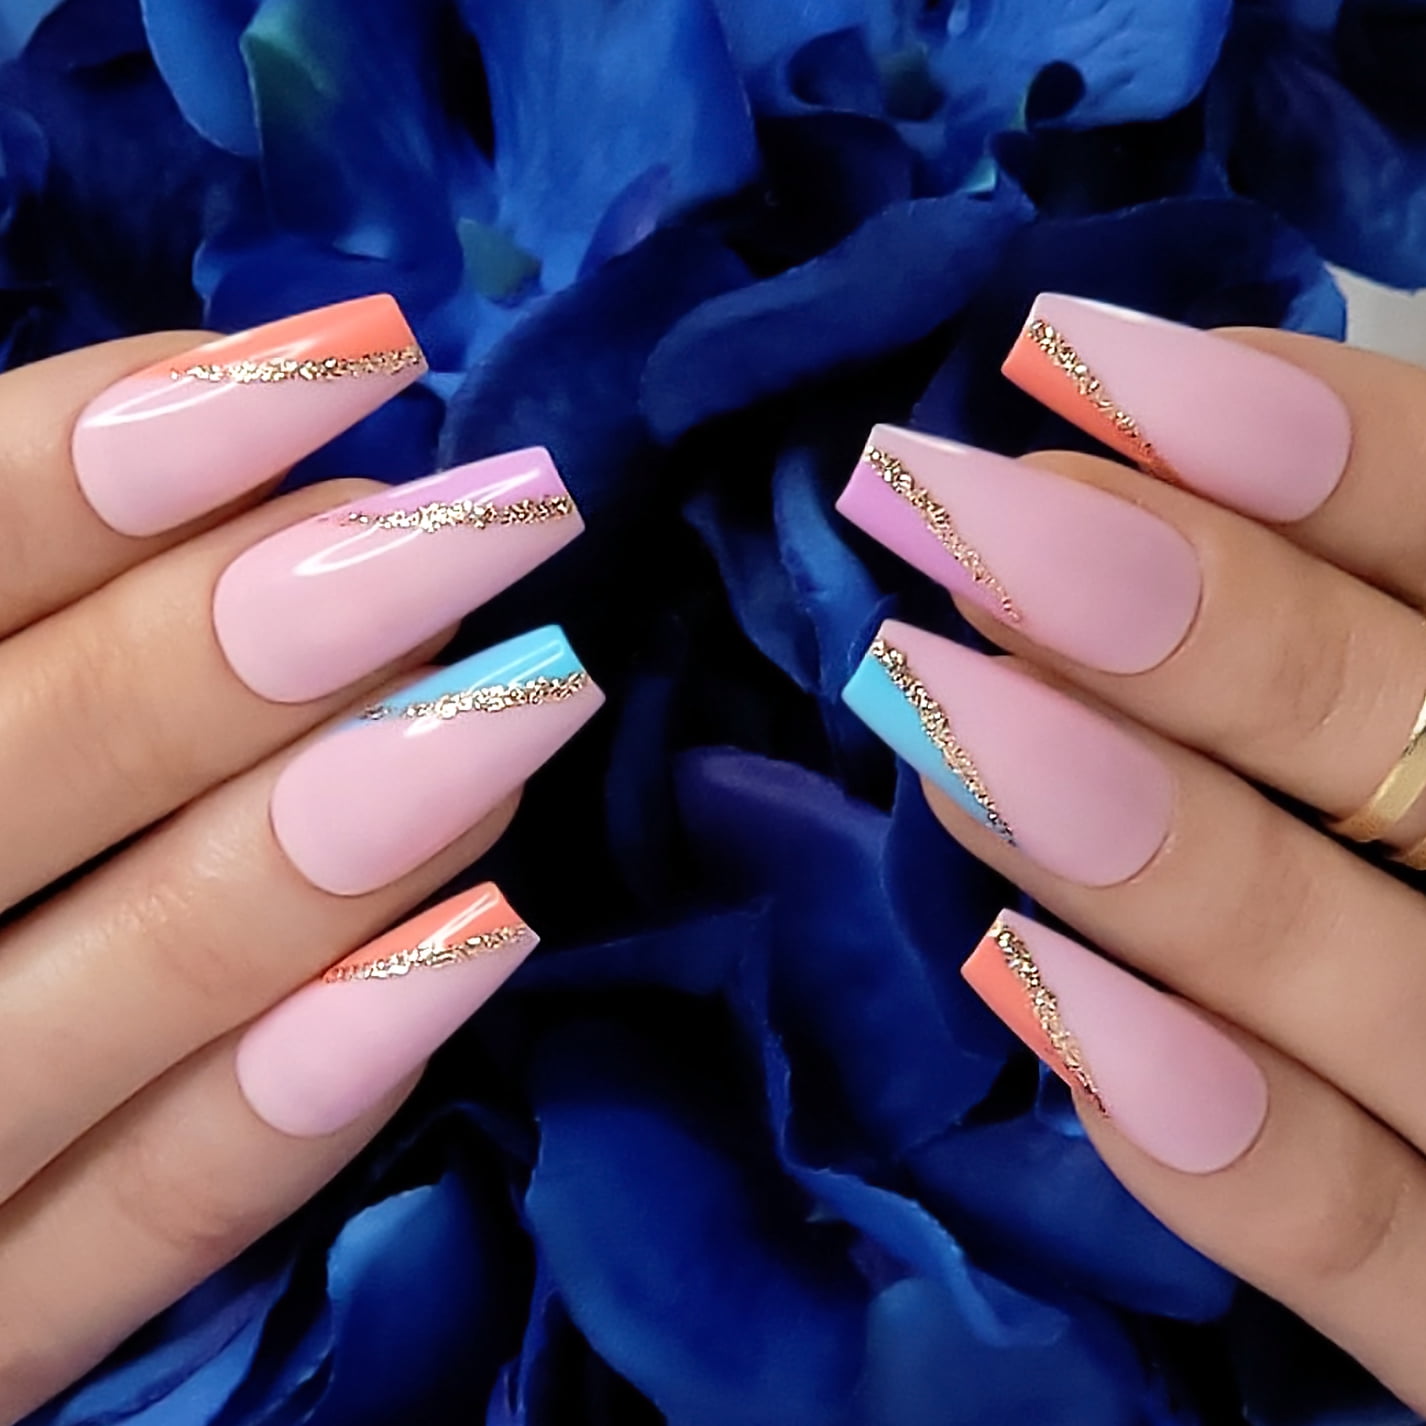 43 Crazy-Gorgeous Nail Ideas for Coffin Shaped Nails - StayGlam